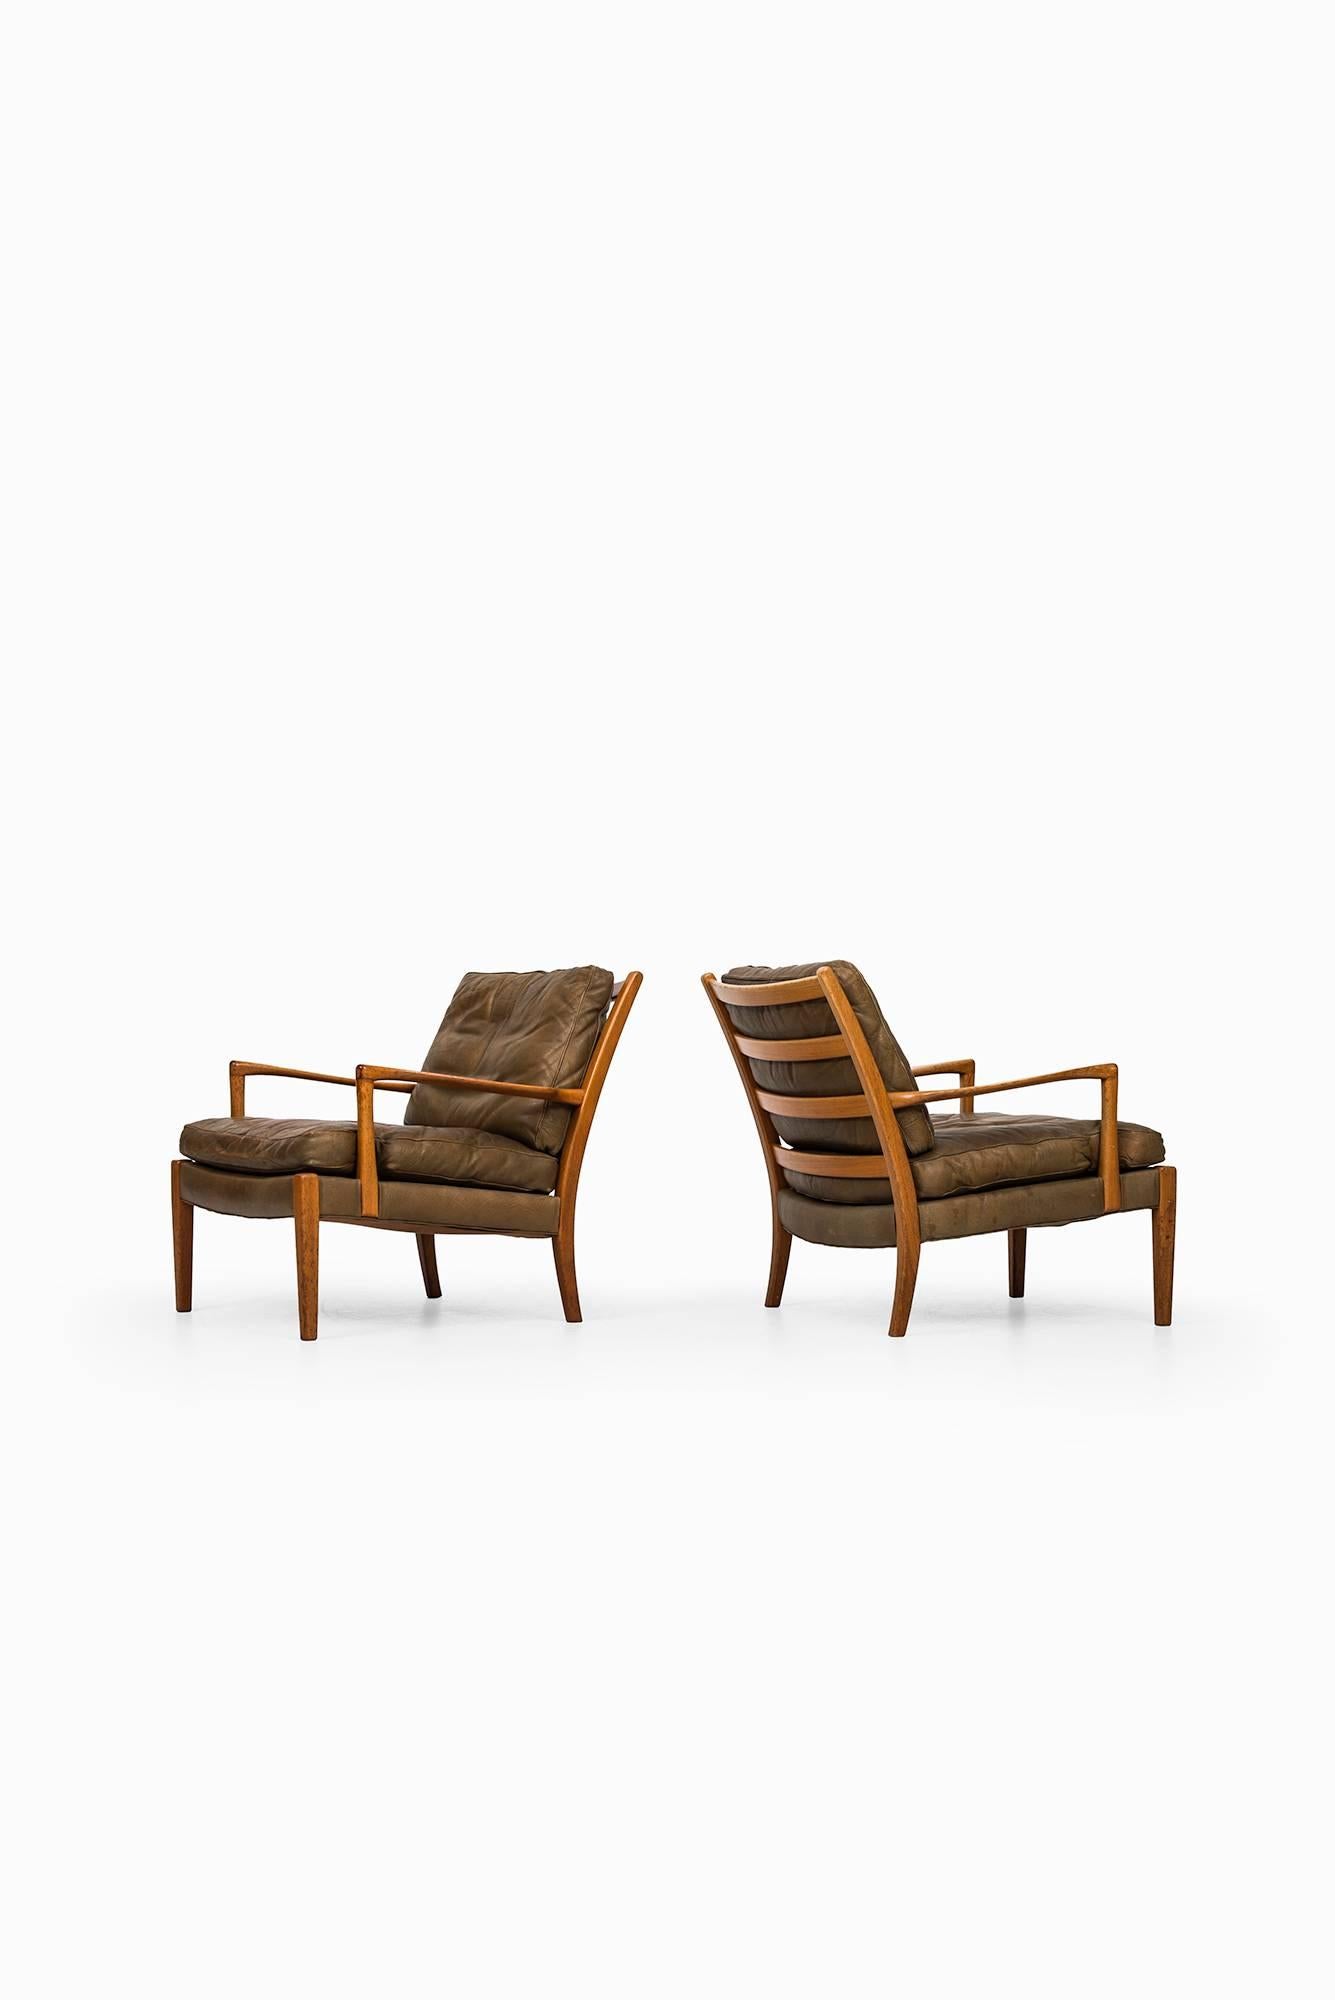 Rare pair of easy chairs model Löven designed by Arne Norell. Produced by Arne Norell AB in Aneby, Sweden.